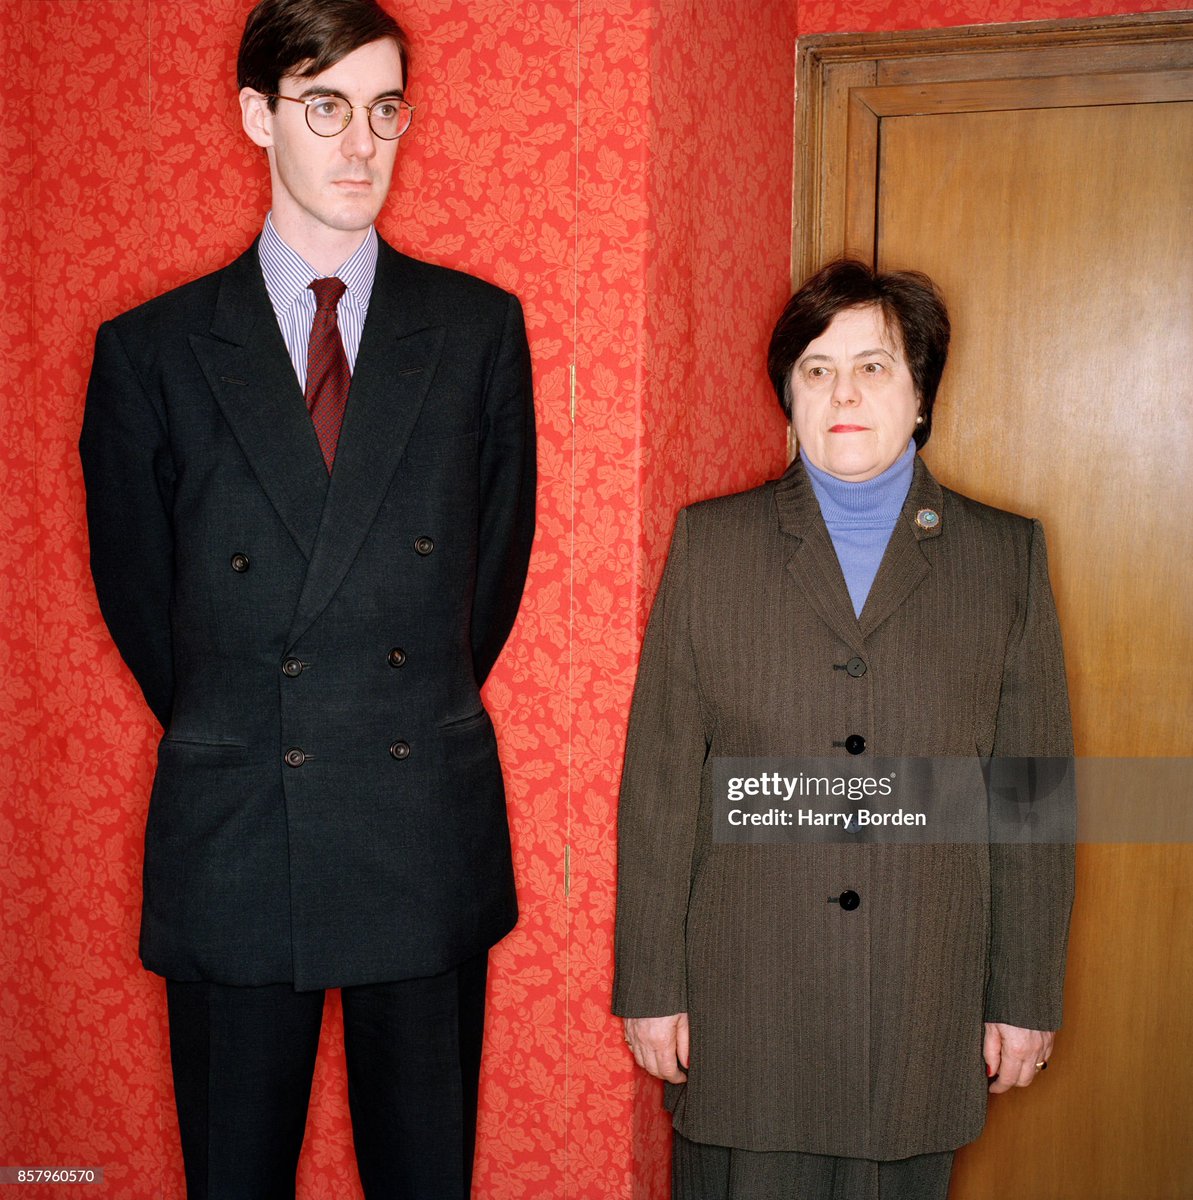 Conservative politician is photographed for Night and Day magazine with his nanny Veronica Crook (2000)